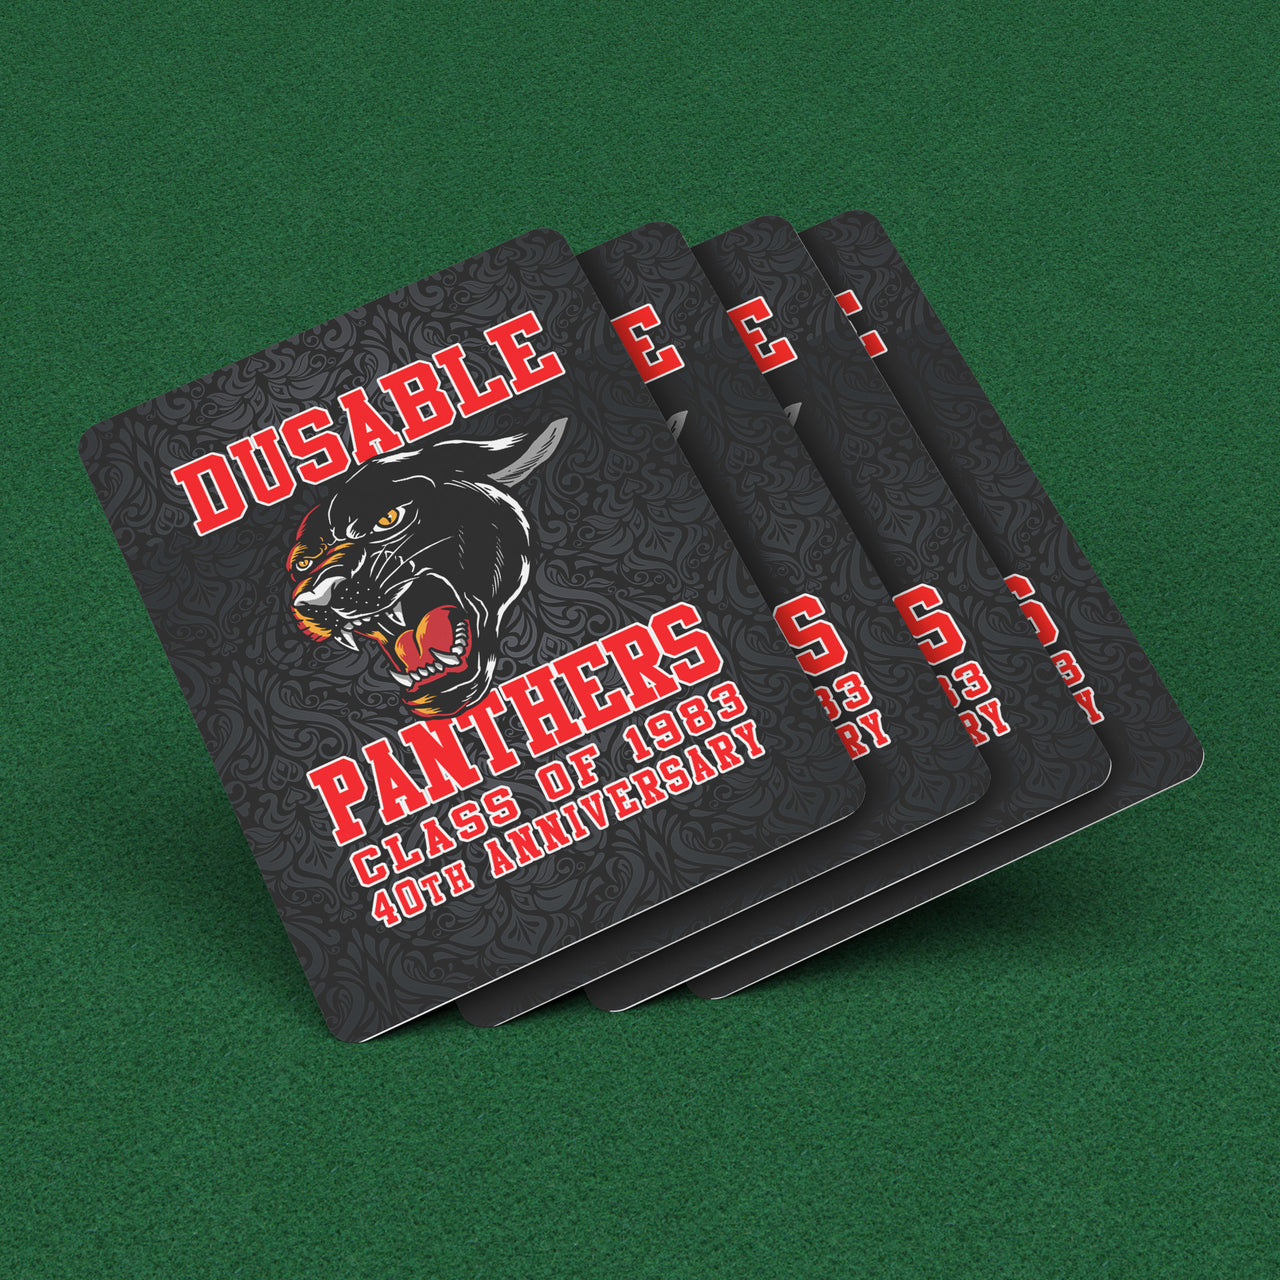 DuSable Playing Card -CLASS OF 83-40TH ANNIVERSARY